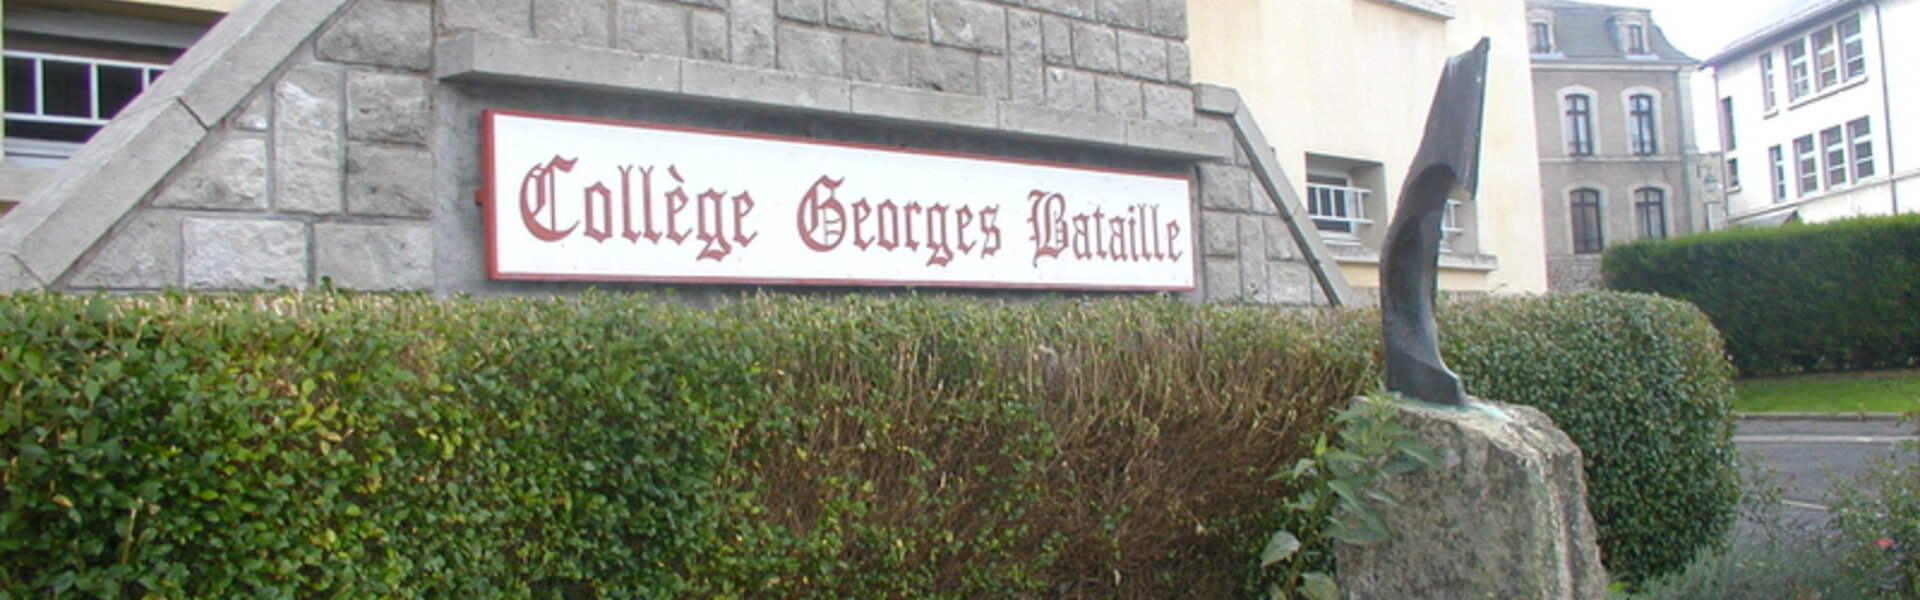 Collège Georges Bataille